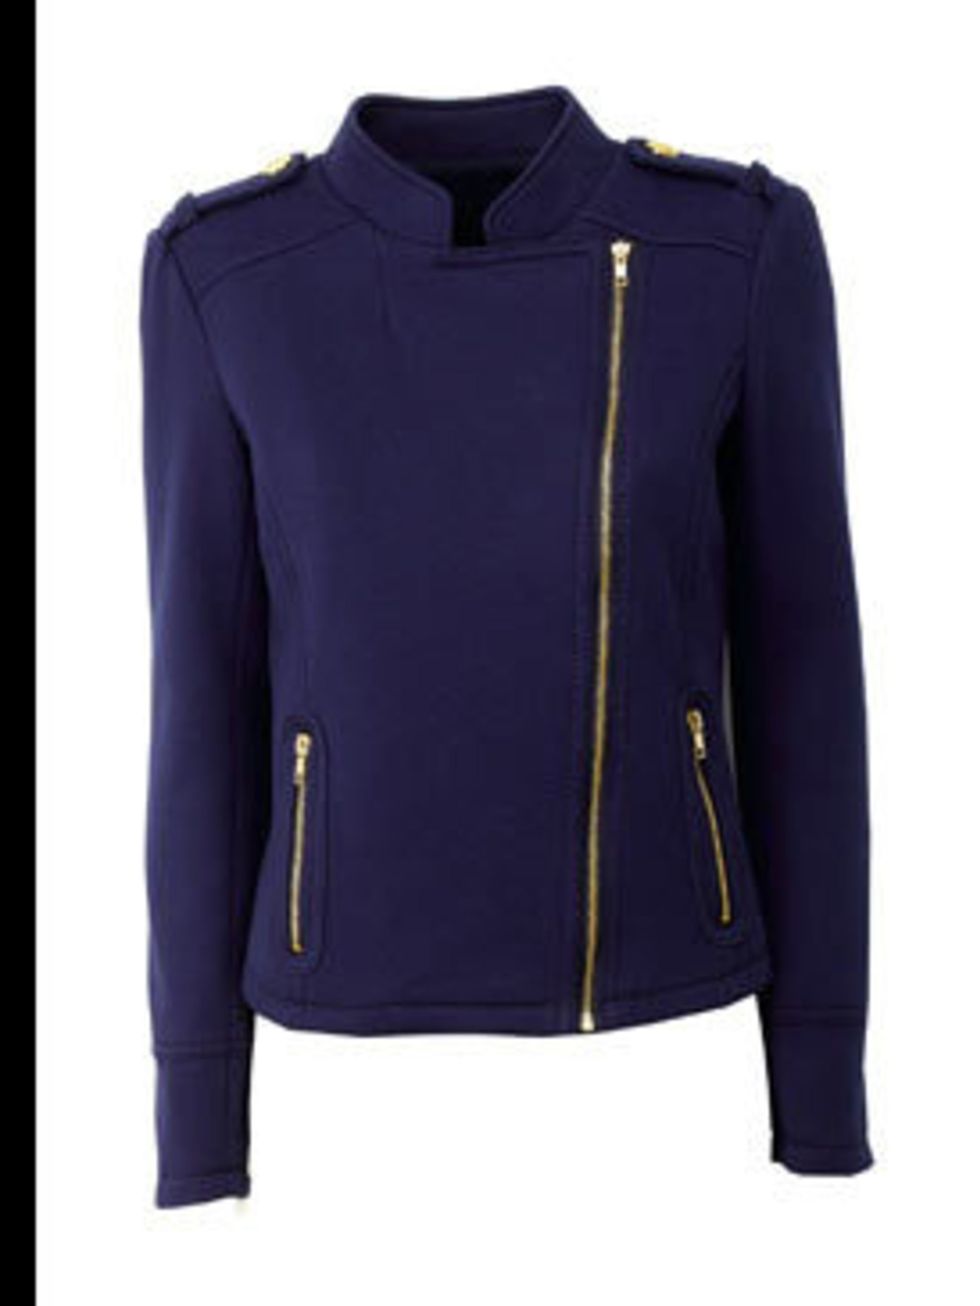 <p>Jacket, £59 by Indigo at <a href="http://www.marksandspencer.com/b/42966030?ie=UTF8&amp;pf_rd_r=0HVFG2Z8B165E7X0KPPE&amp;pf_rd_p=467211433&amp;intid=gnav_hp_img&amp;pf_rd_i=42966030&amp;pf_rd_s=global-top-3&amp;pf_rd_m=A2BO0OYVBKIQJM&amp;pf_rd_t=101">M